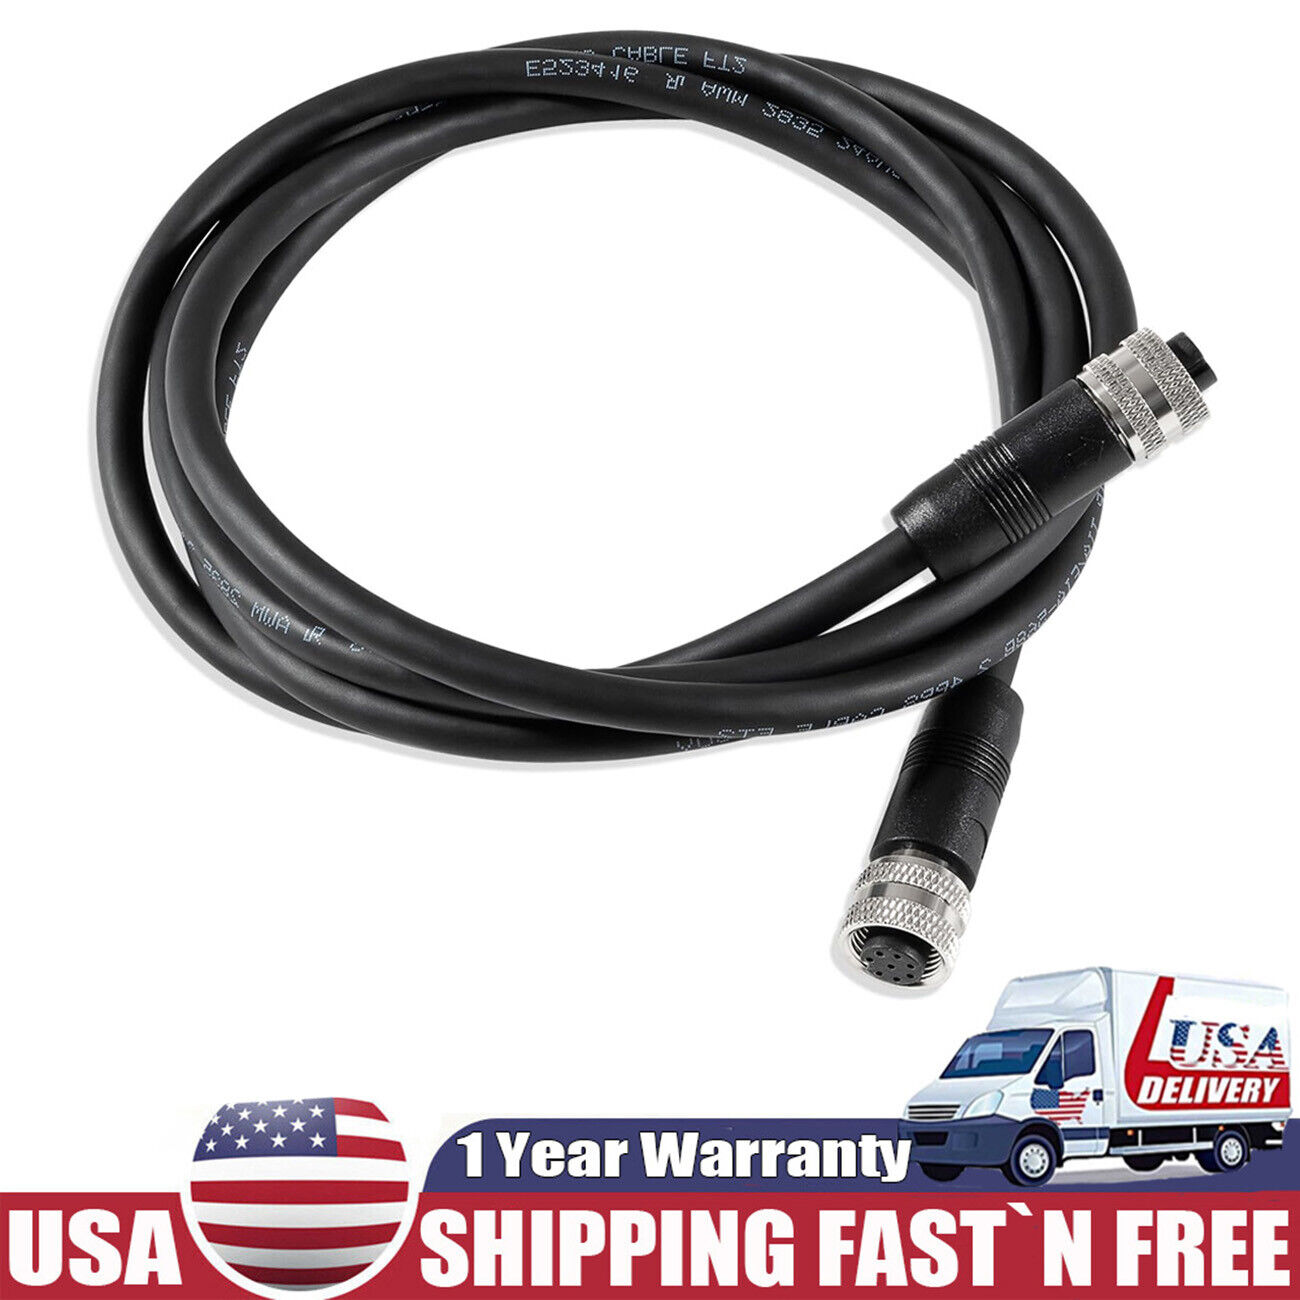 For Humminbird 720073-6 AS EC 5E Ethernet Cable 5Ft for SOLIX, Helix G2N, Onix